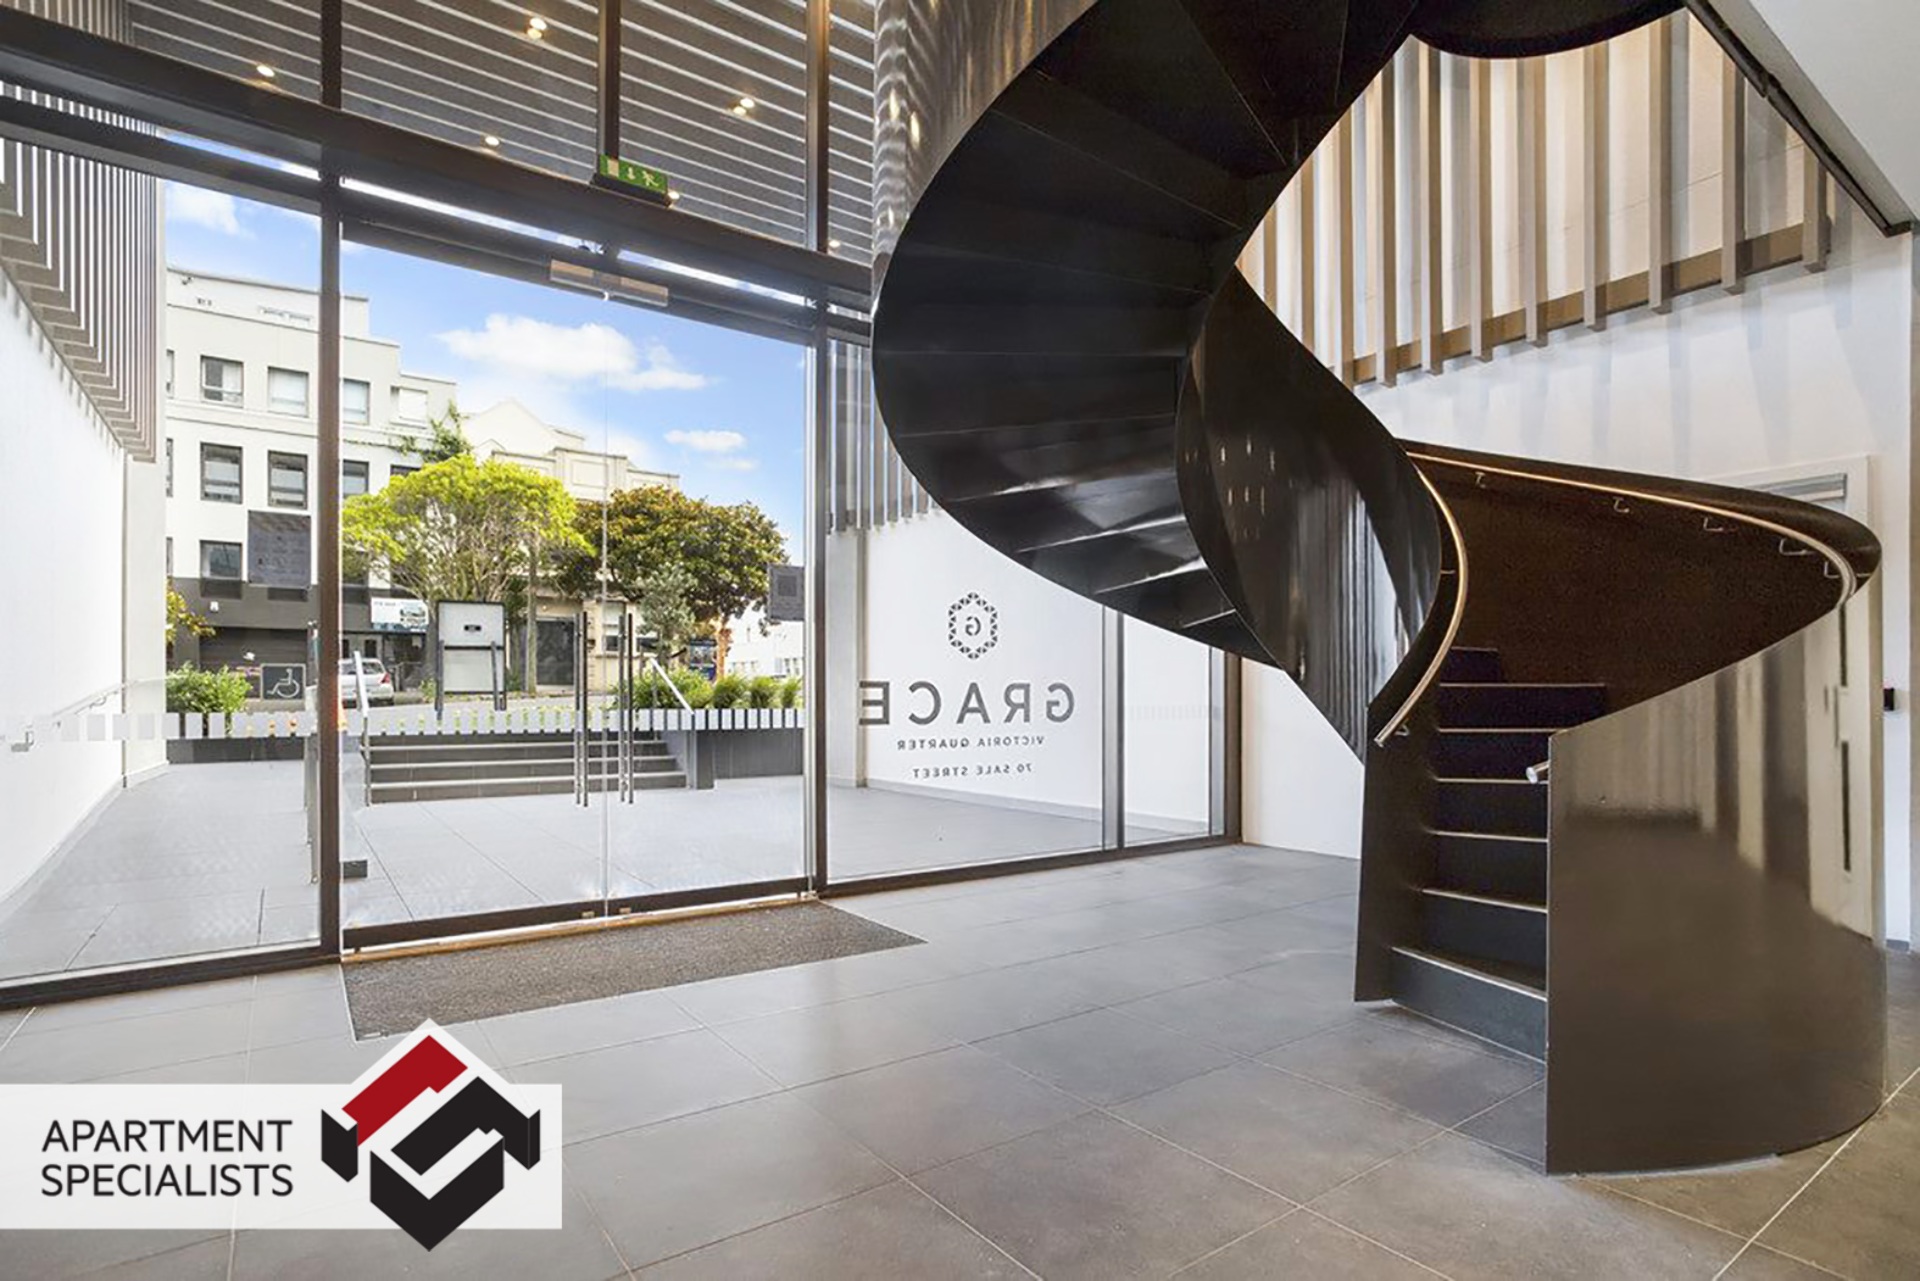 18 | 70 Sale Street, Freemans Bay | Apartment Specialists